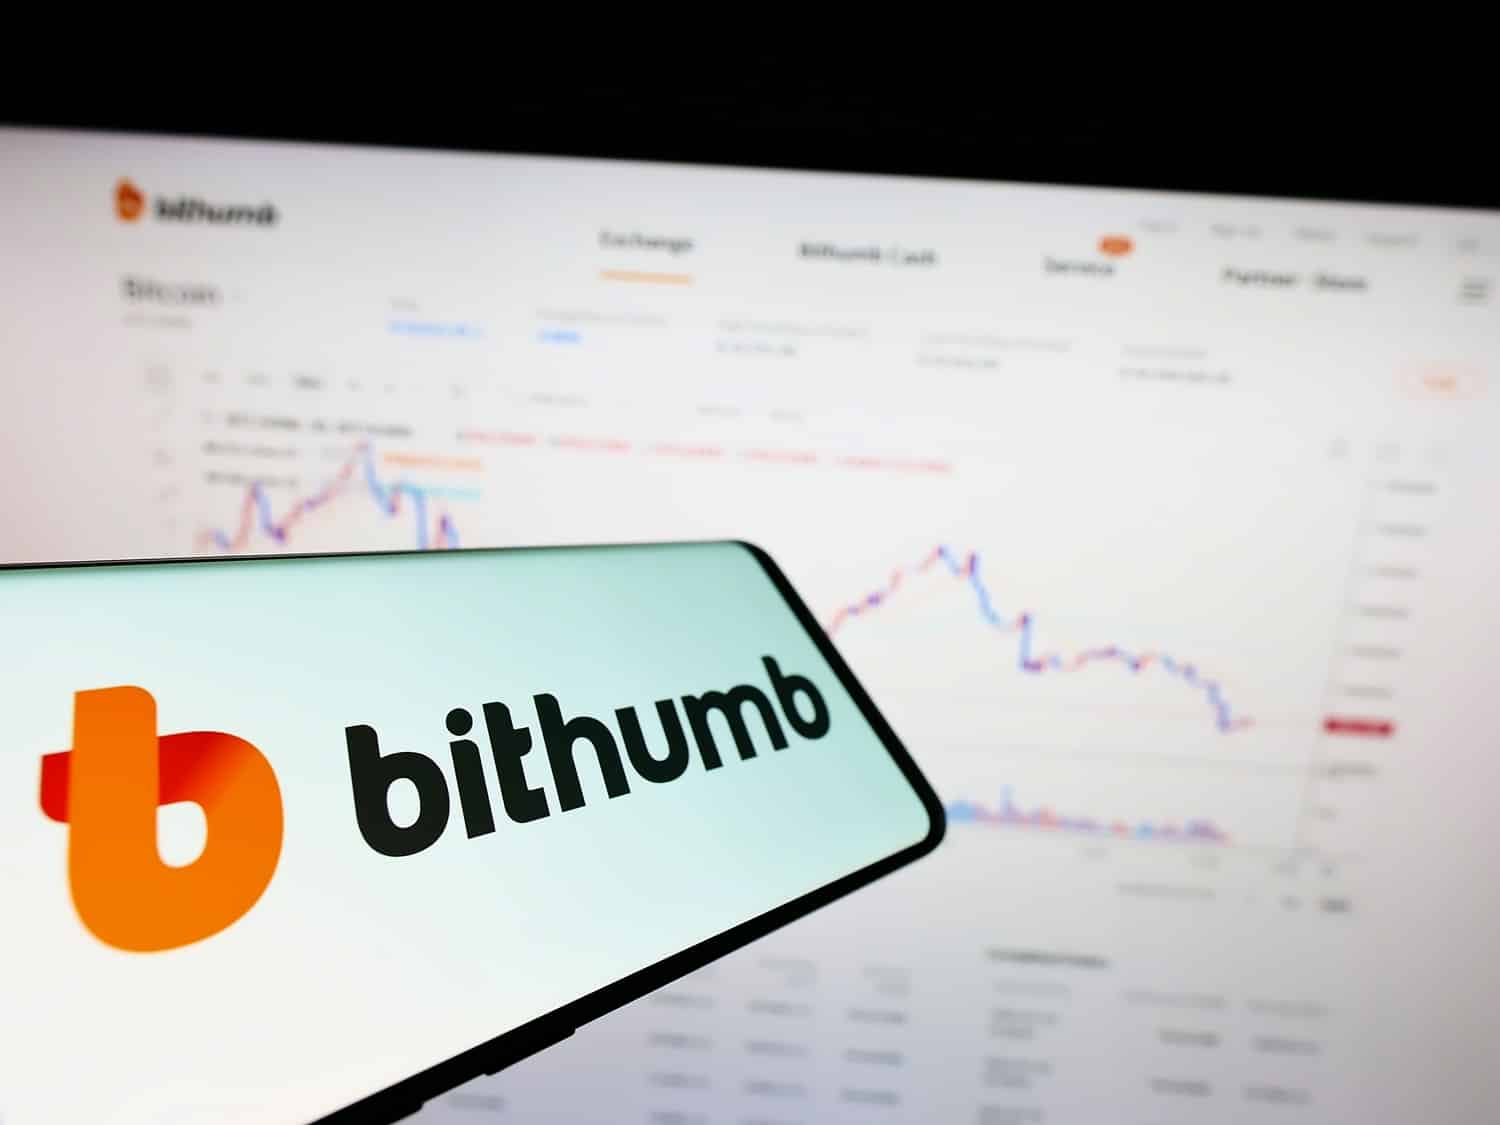 South Korean Crypto Exchange Bithumb Still Aiming for IPO Despite ‘Deep’ Troubles